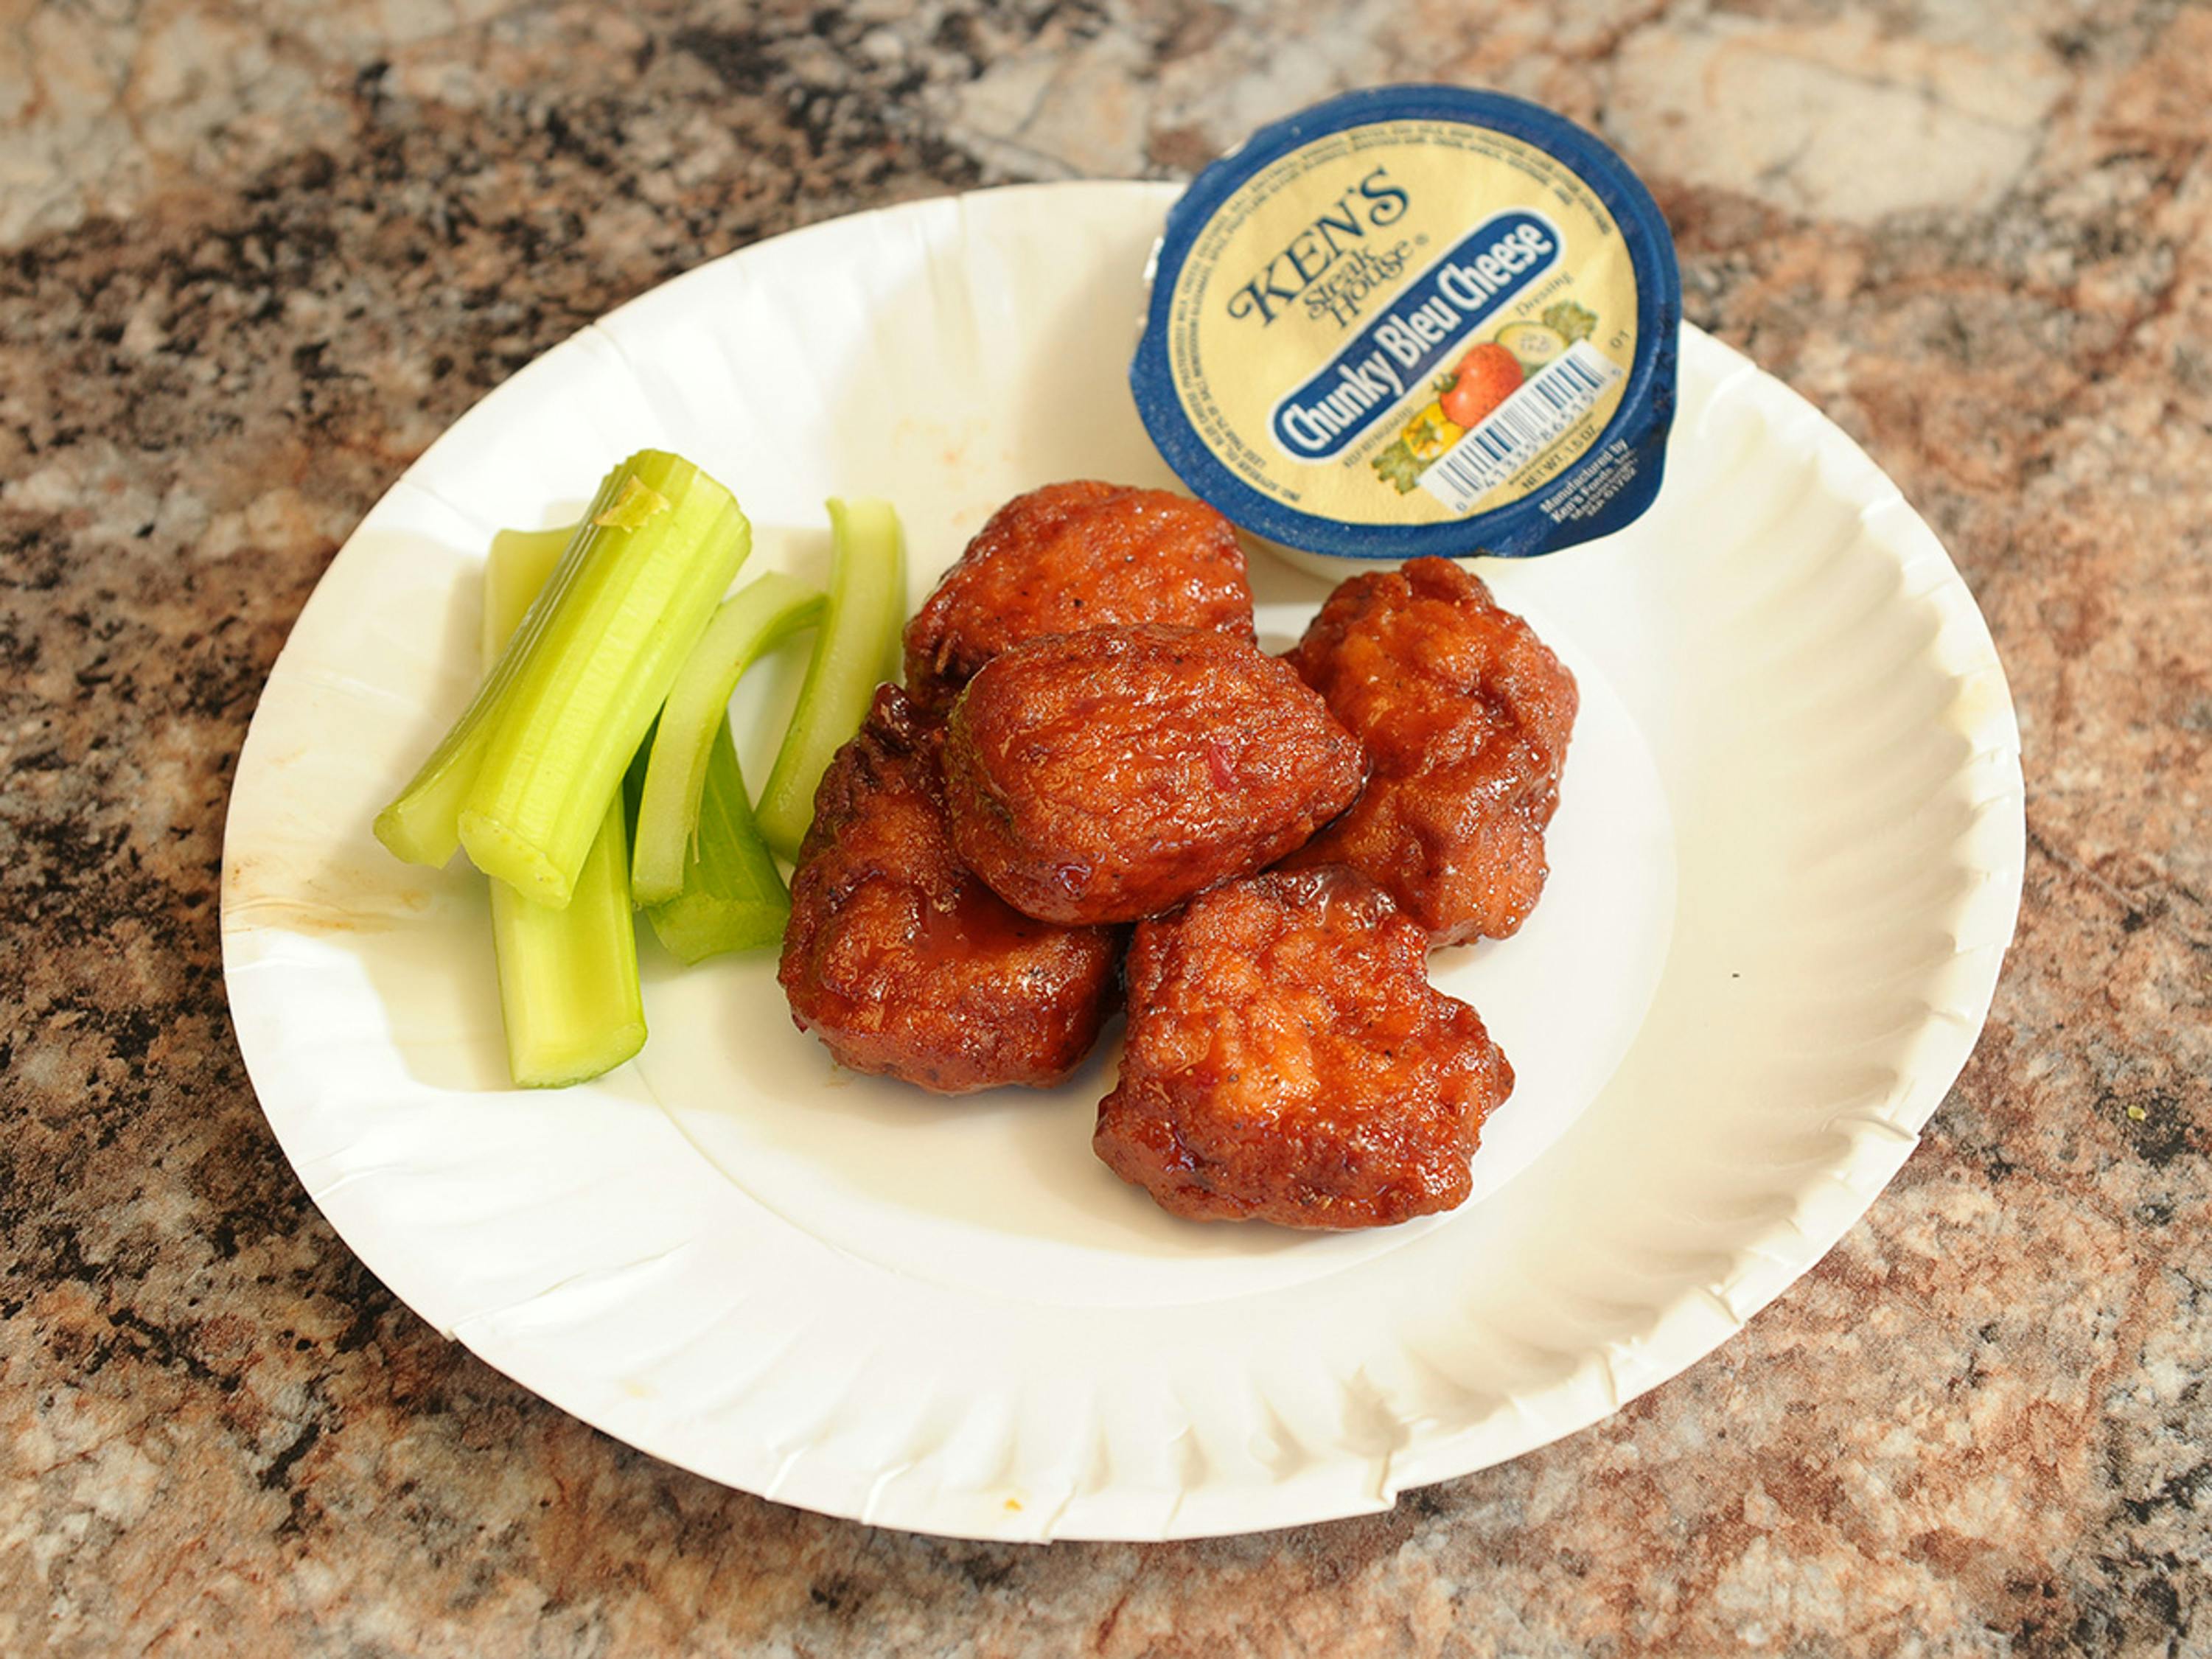 Boneless Wings from All Star Pizza in Rochester, NY